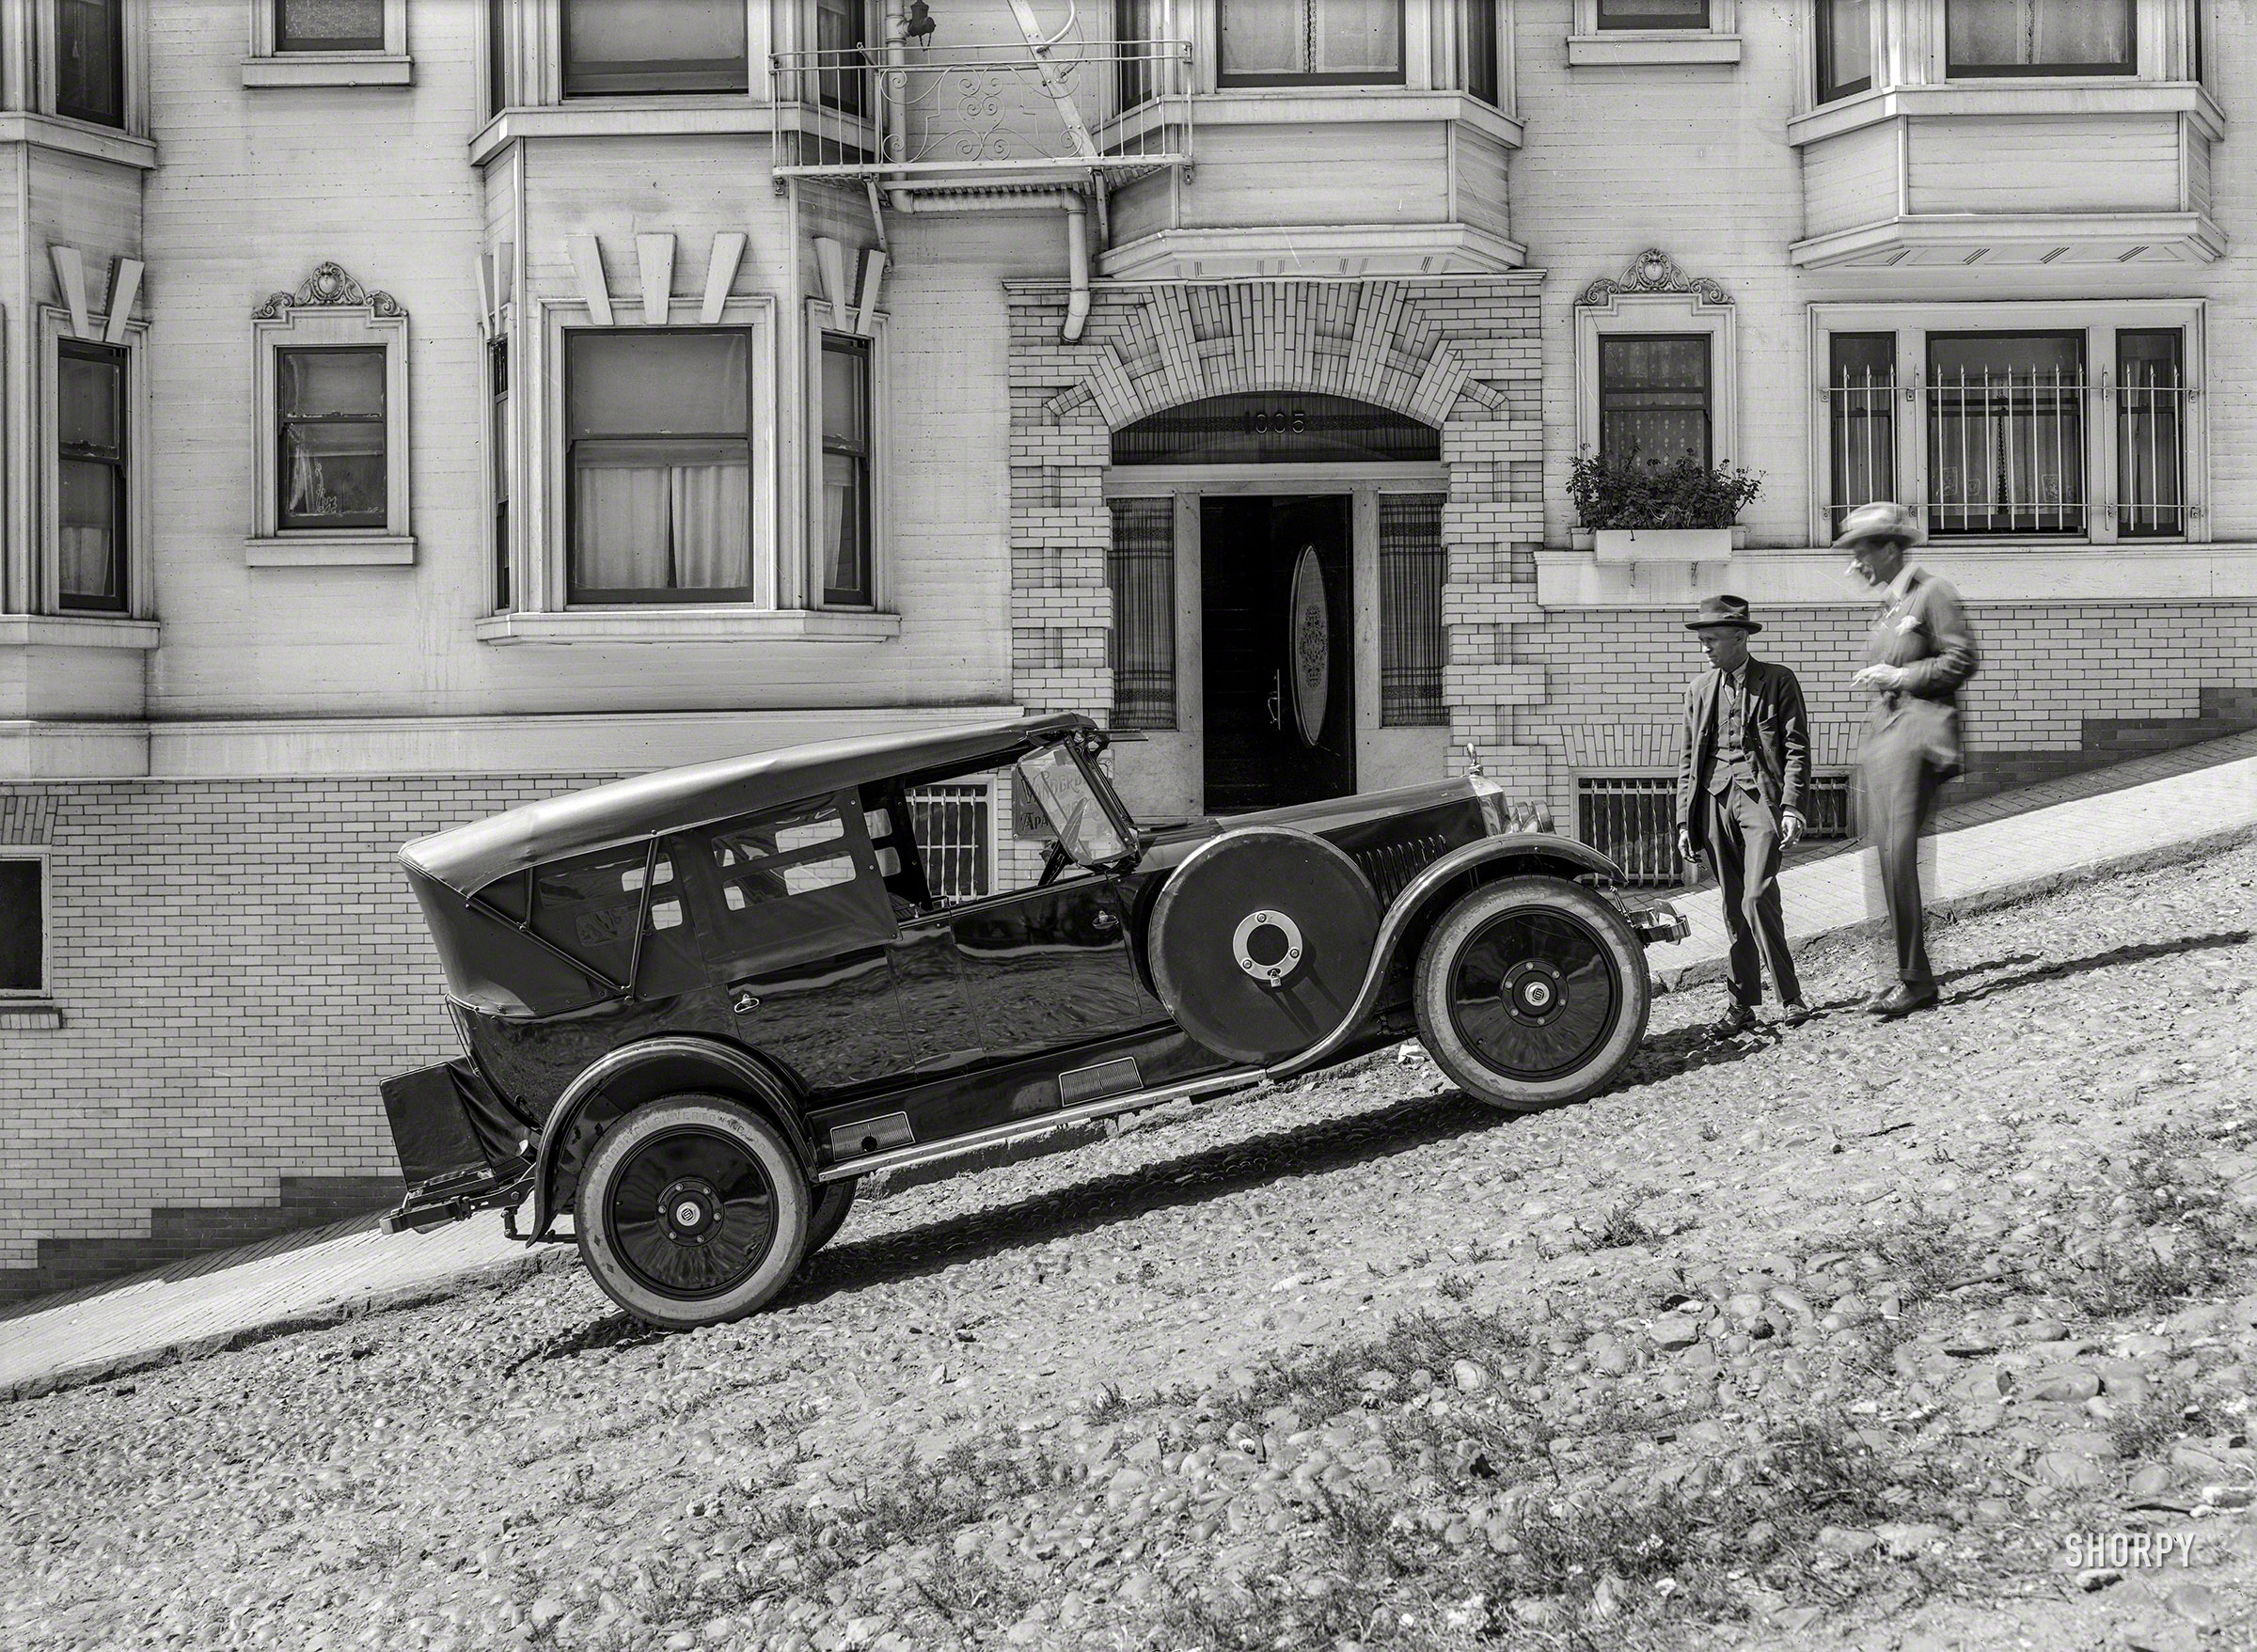 San Francisco circa 1923. "Studebaker Big Six touring car." At the Vanderbilt Apartments. 5x7 glass negative by Christopher Helin. View full size.